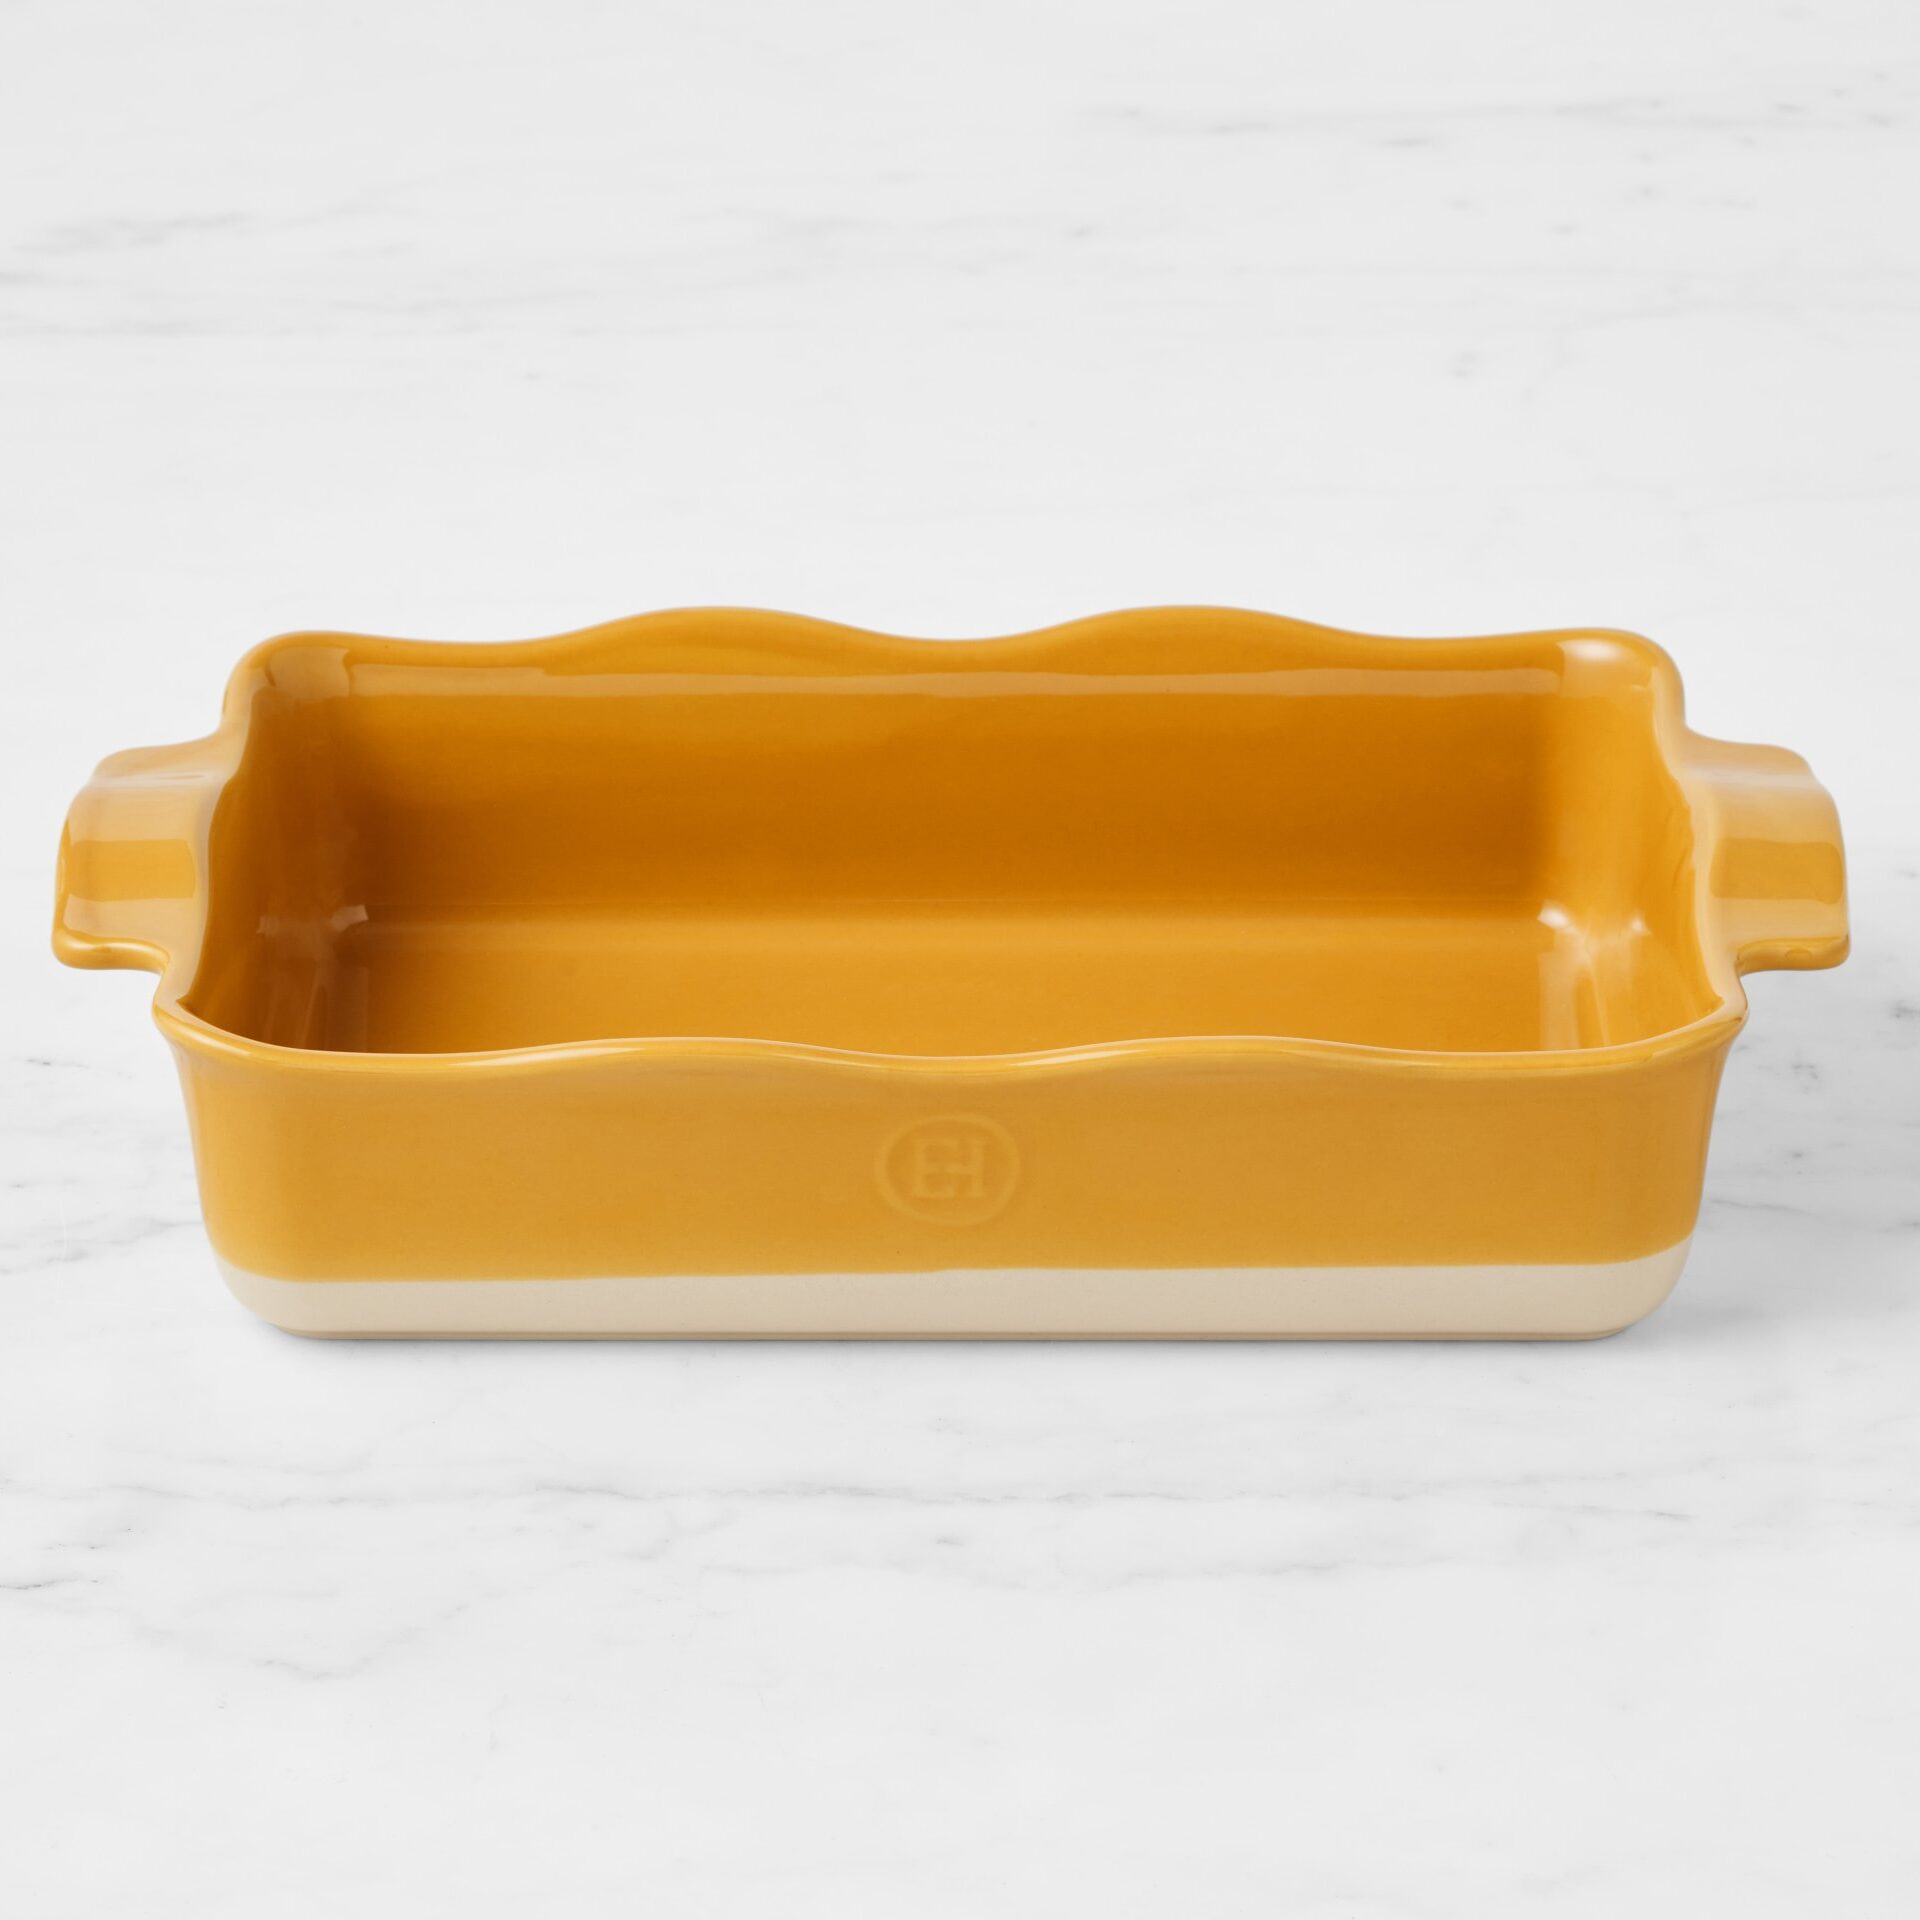 Editor-Approved Super Bowl Serveware, None of Which Is Shaped Like a Football